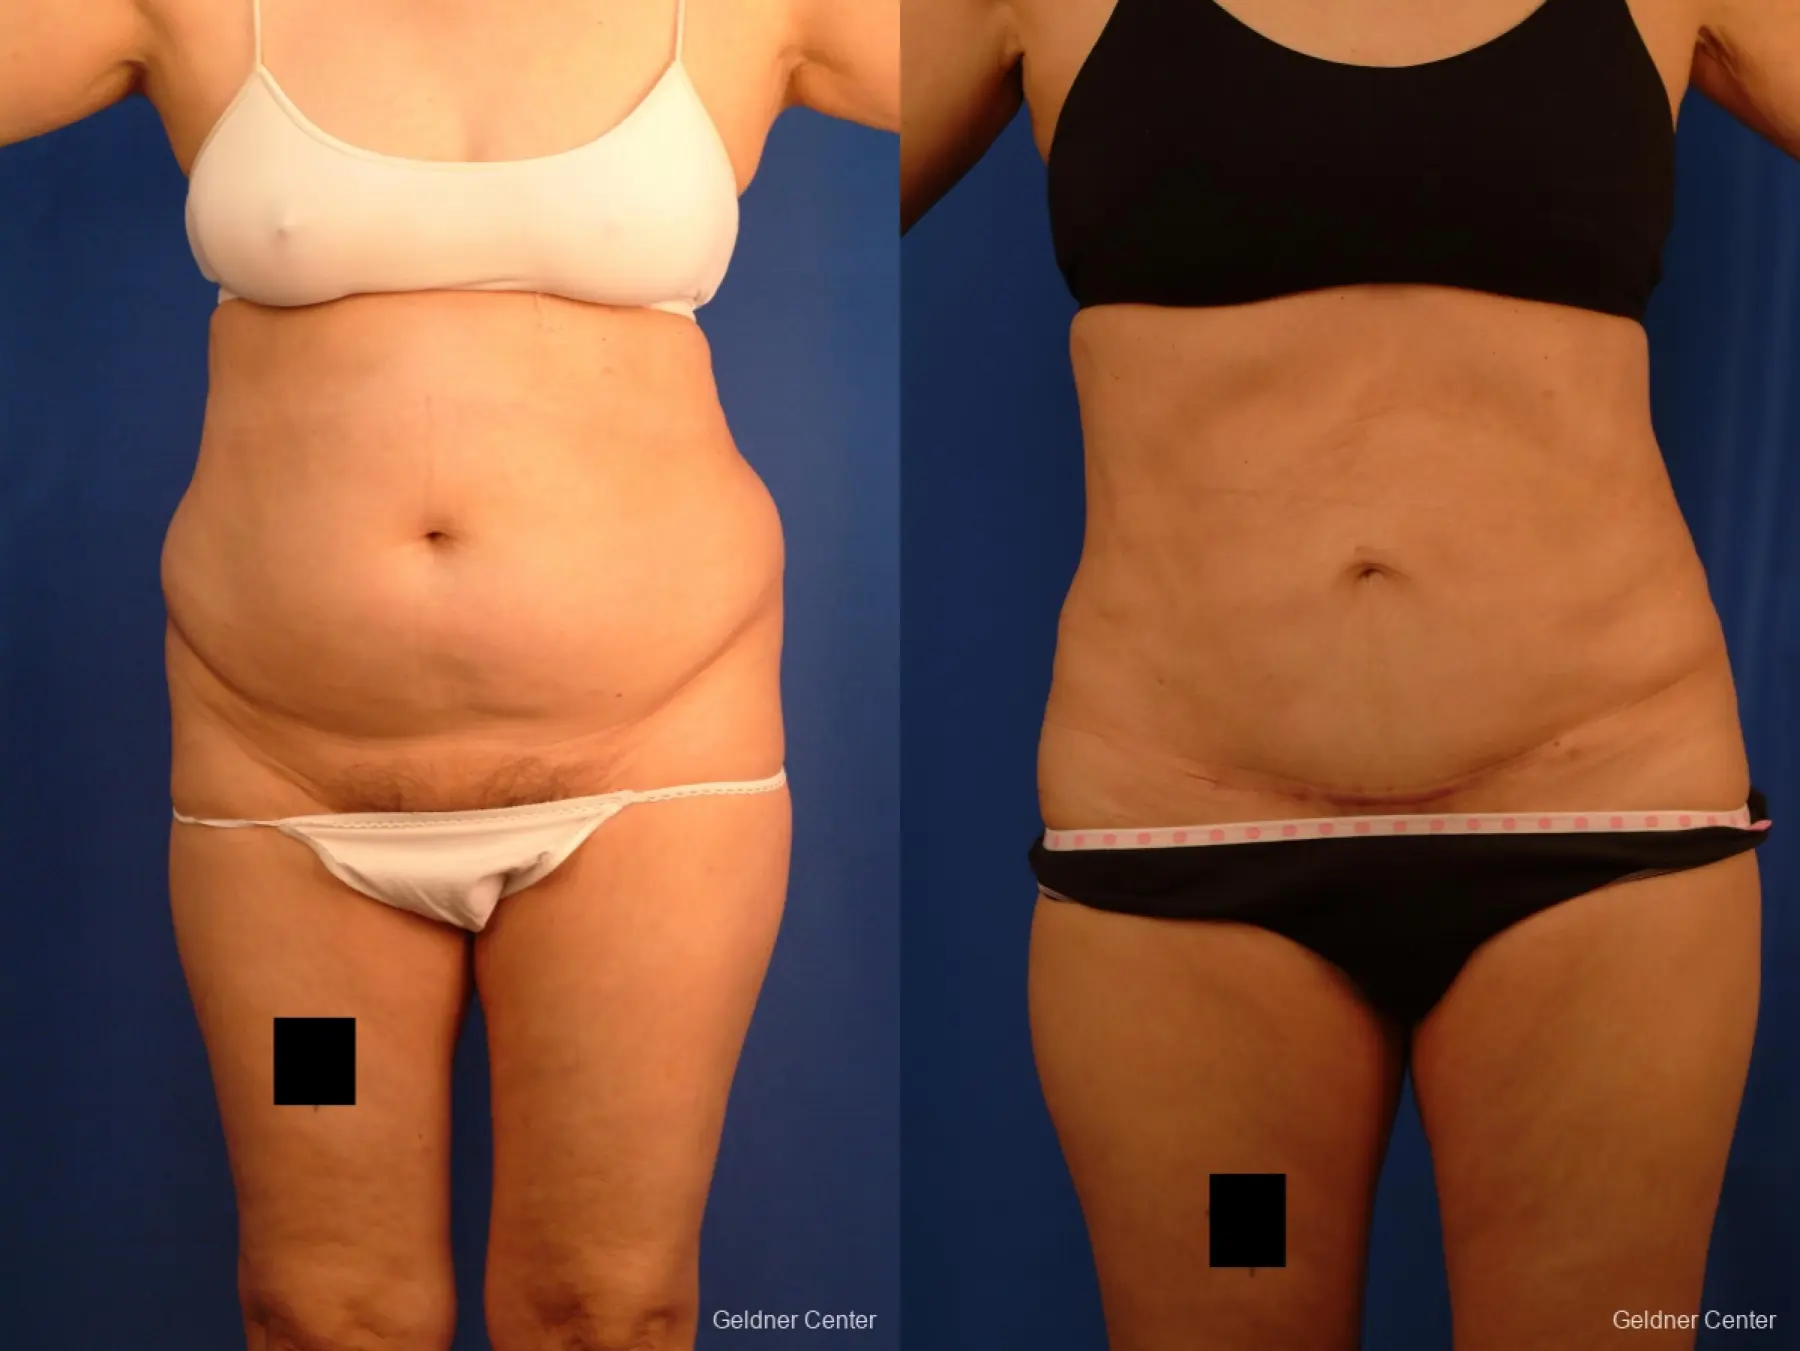 Vaser lipo patient 2536 before and after photos - Before and After